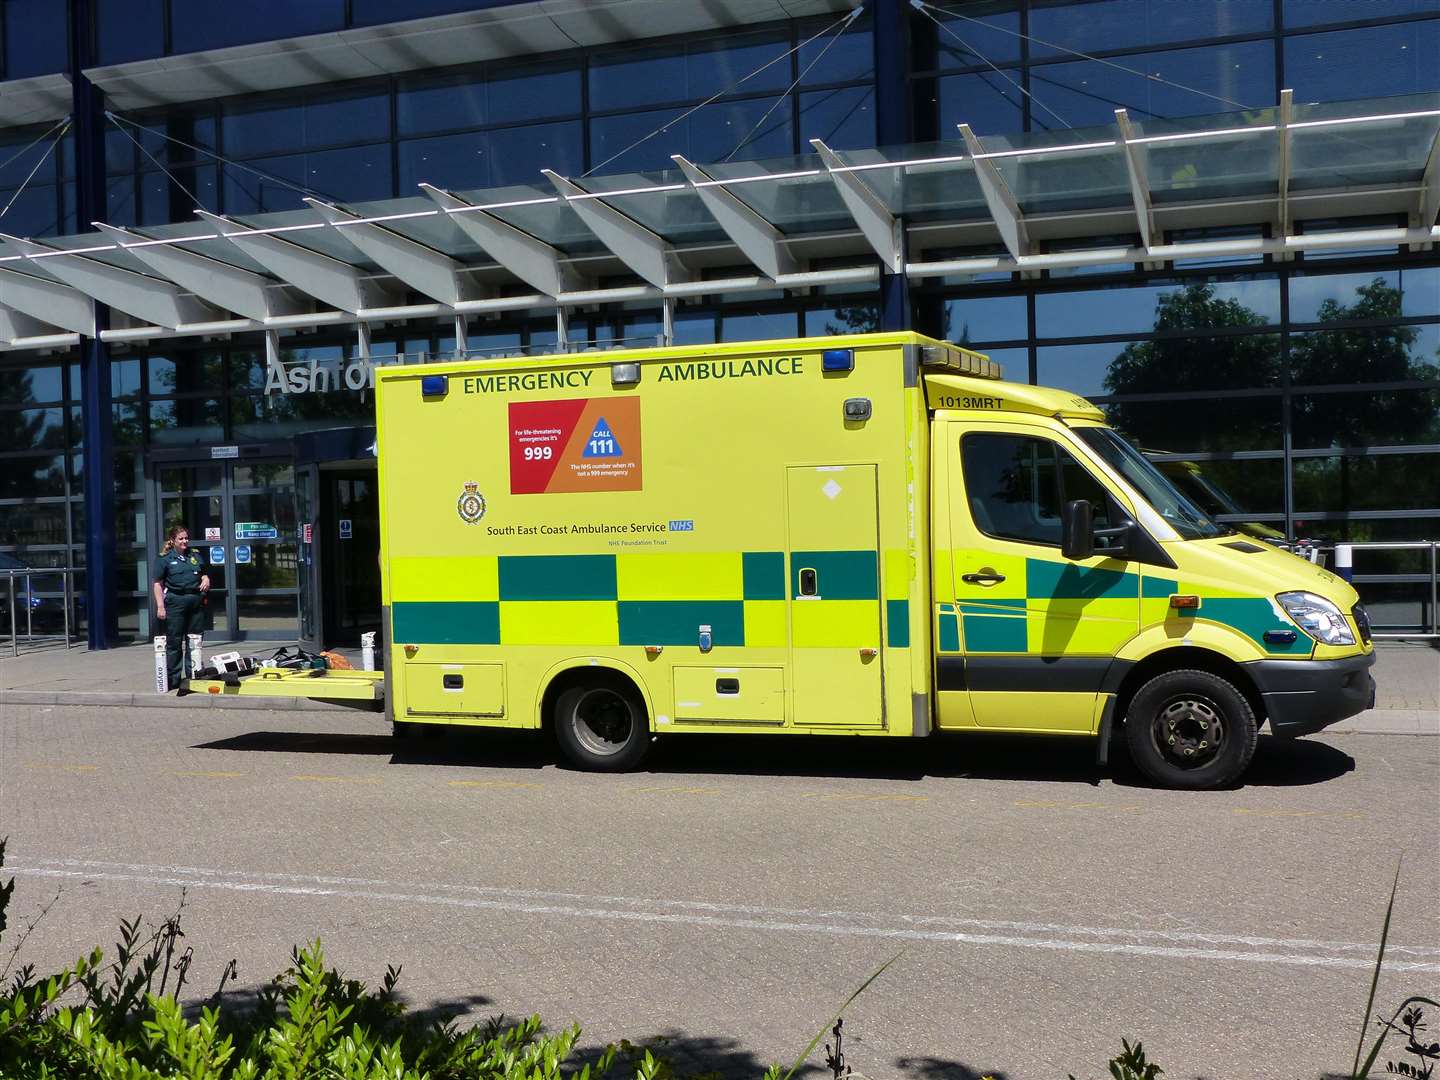 The incident at Ashford International station on Saturday. Credit: Andy Clark